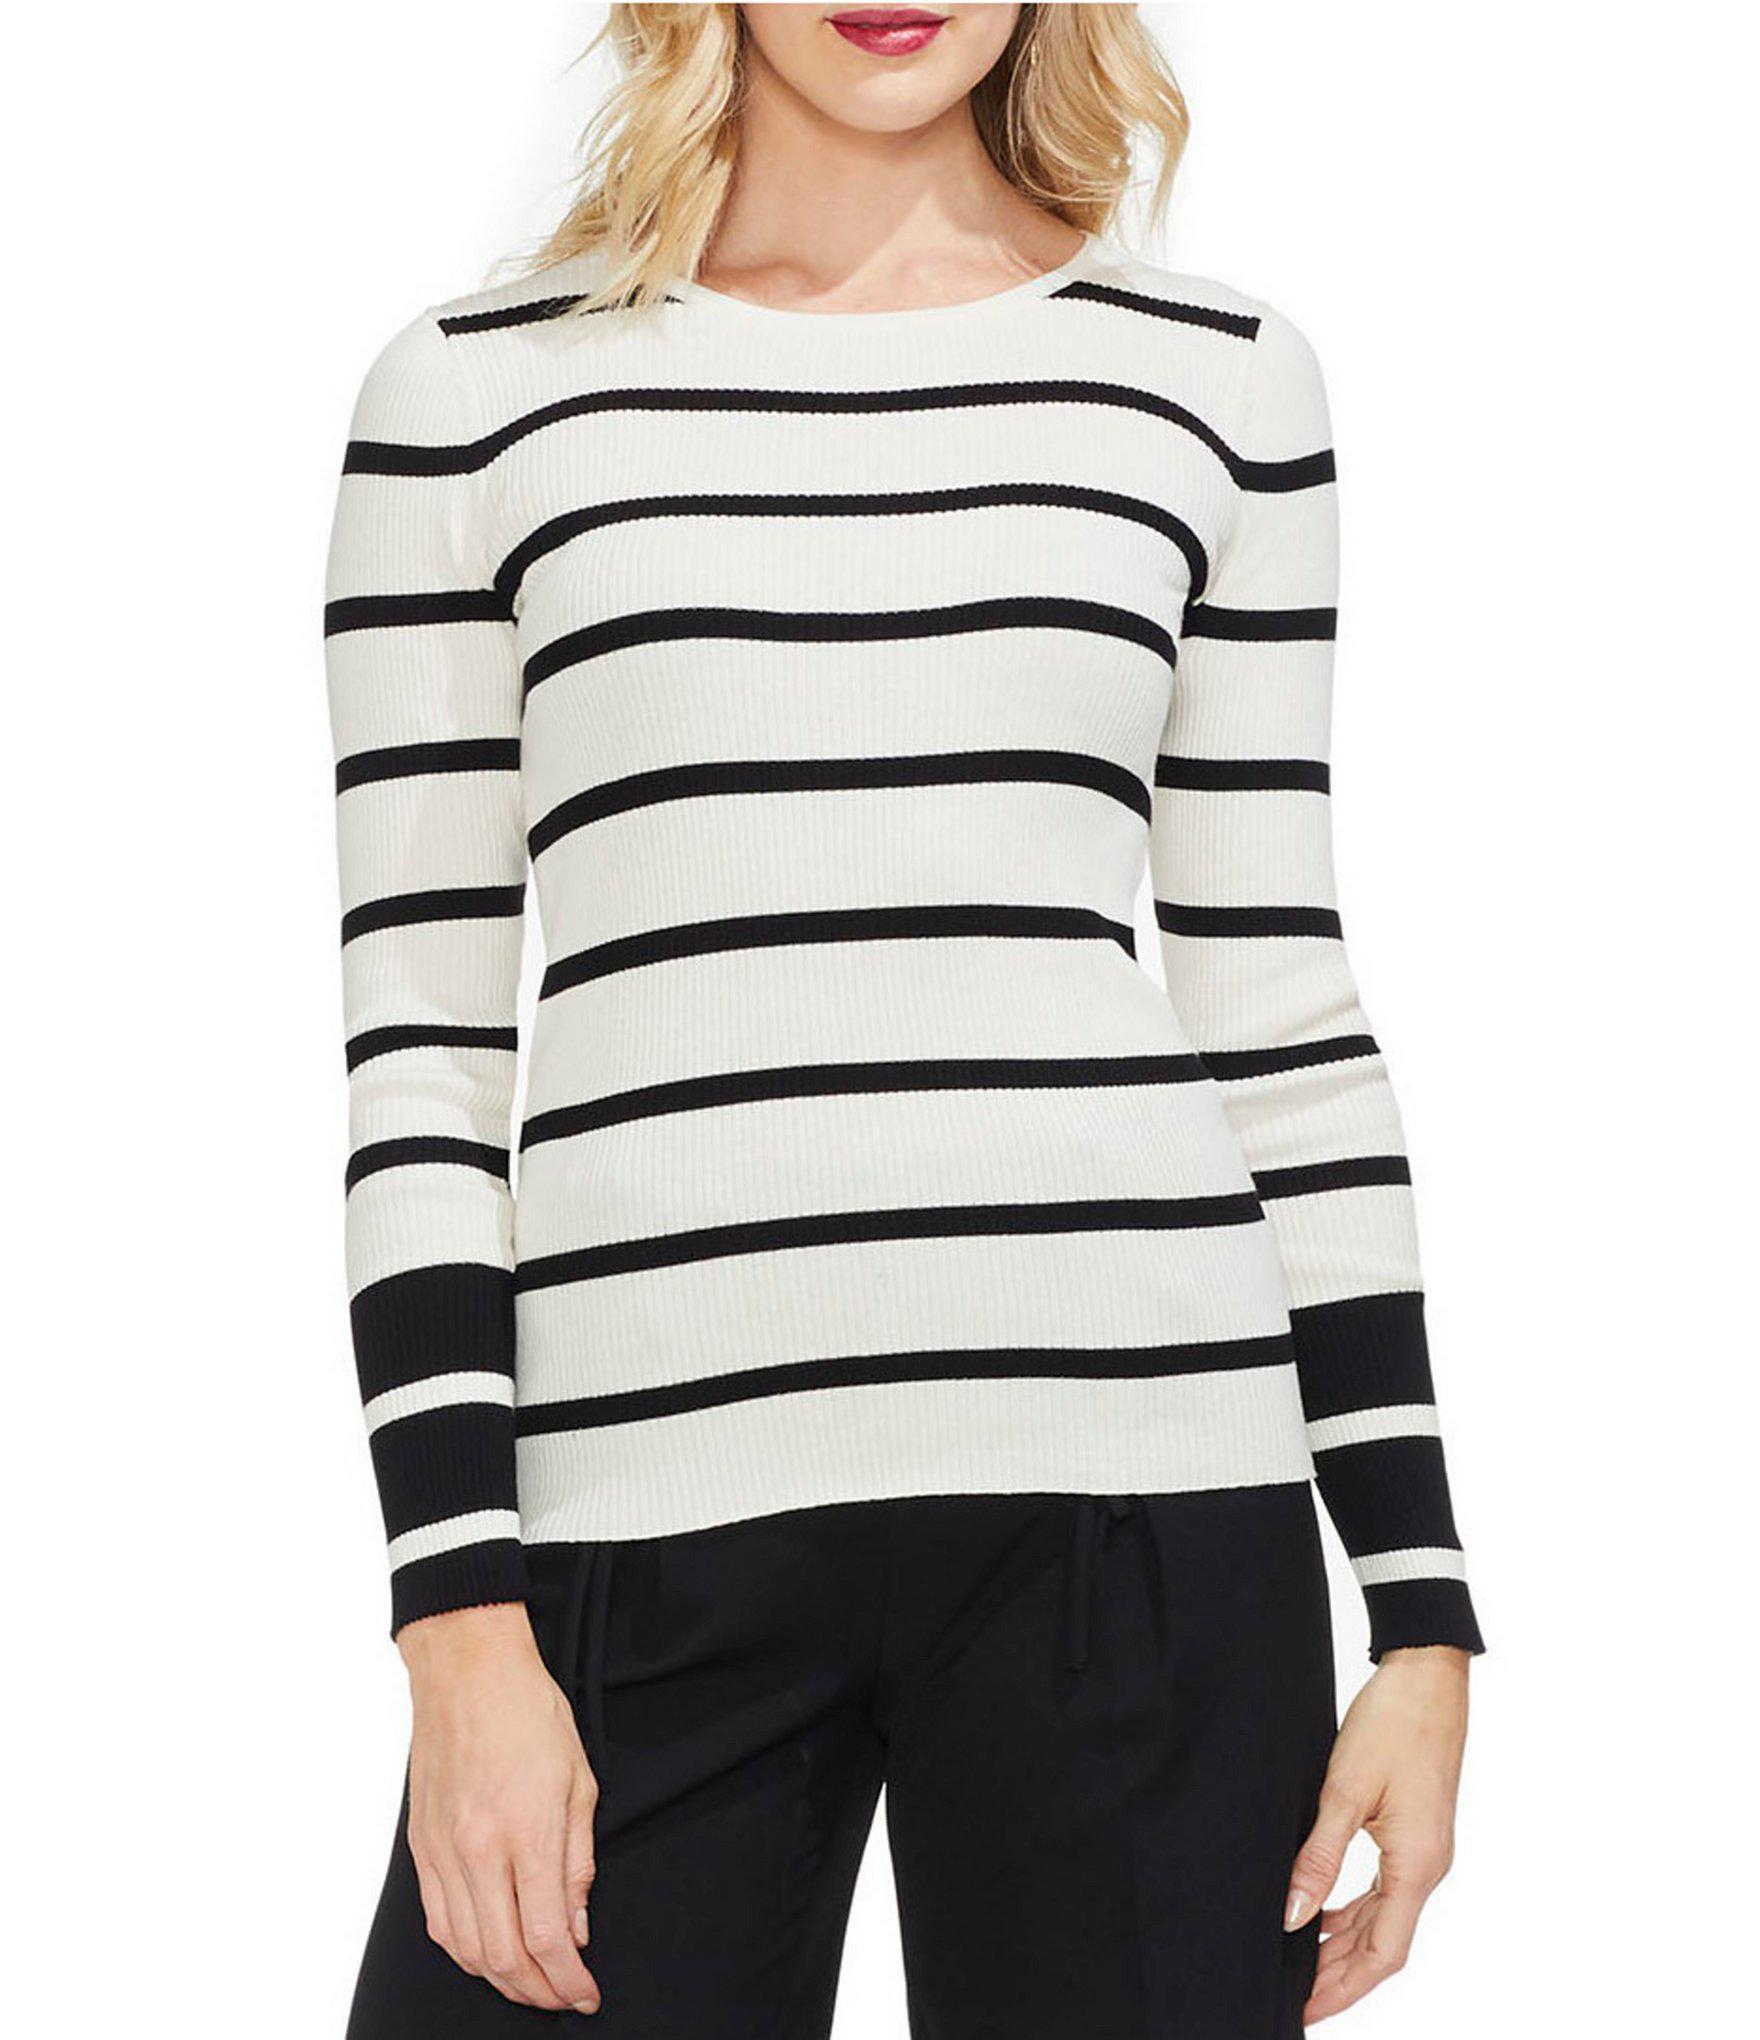 Vince Camuto Ribbed Stripe Sweater in Antique White (White) - Lyst